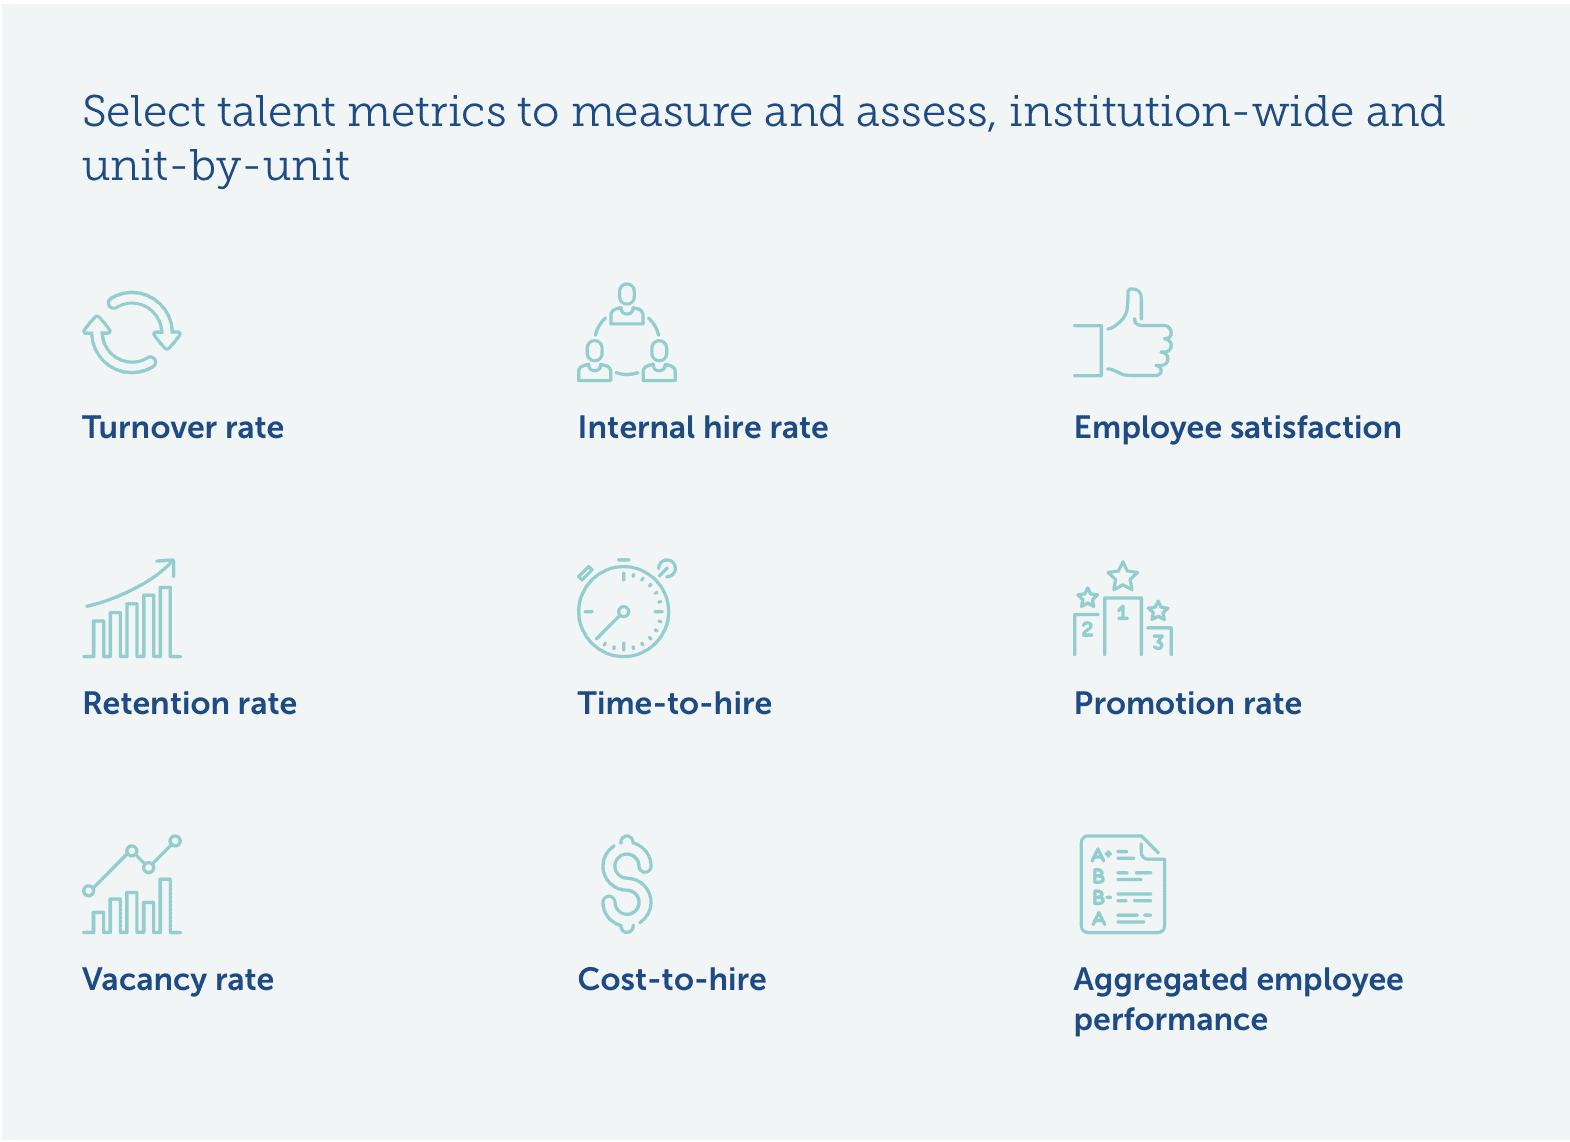 Select talent metrics to measure and assess, institution-wide and sit-by-unit.